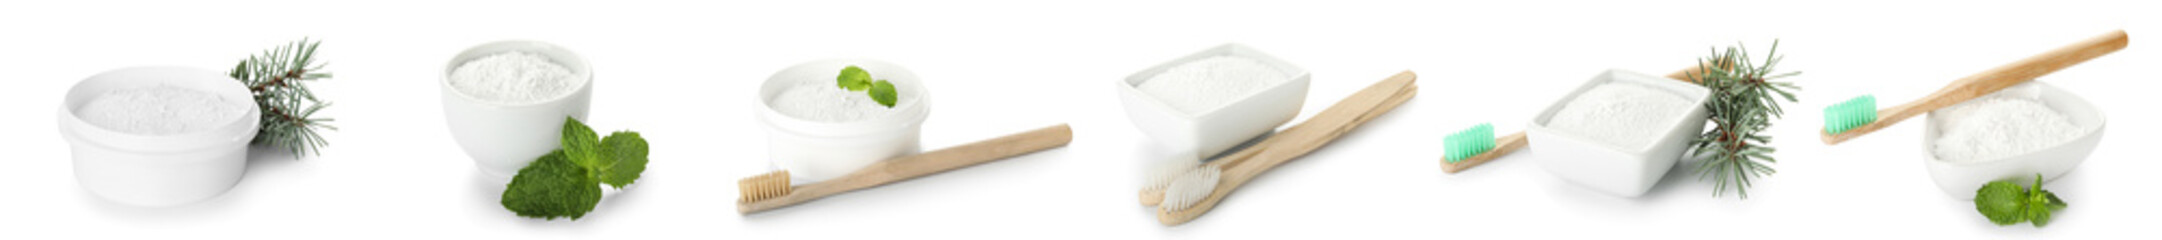 Collage of tooth powder with bamboo brushes on white background